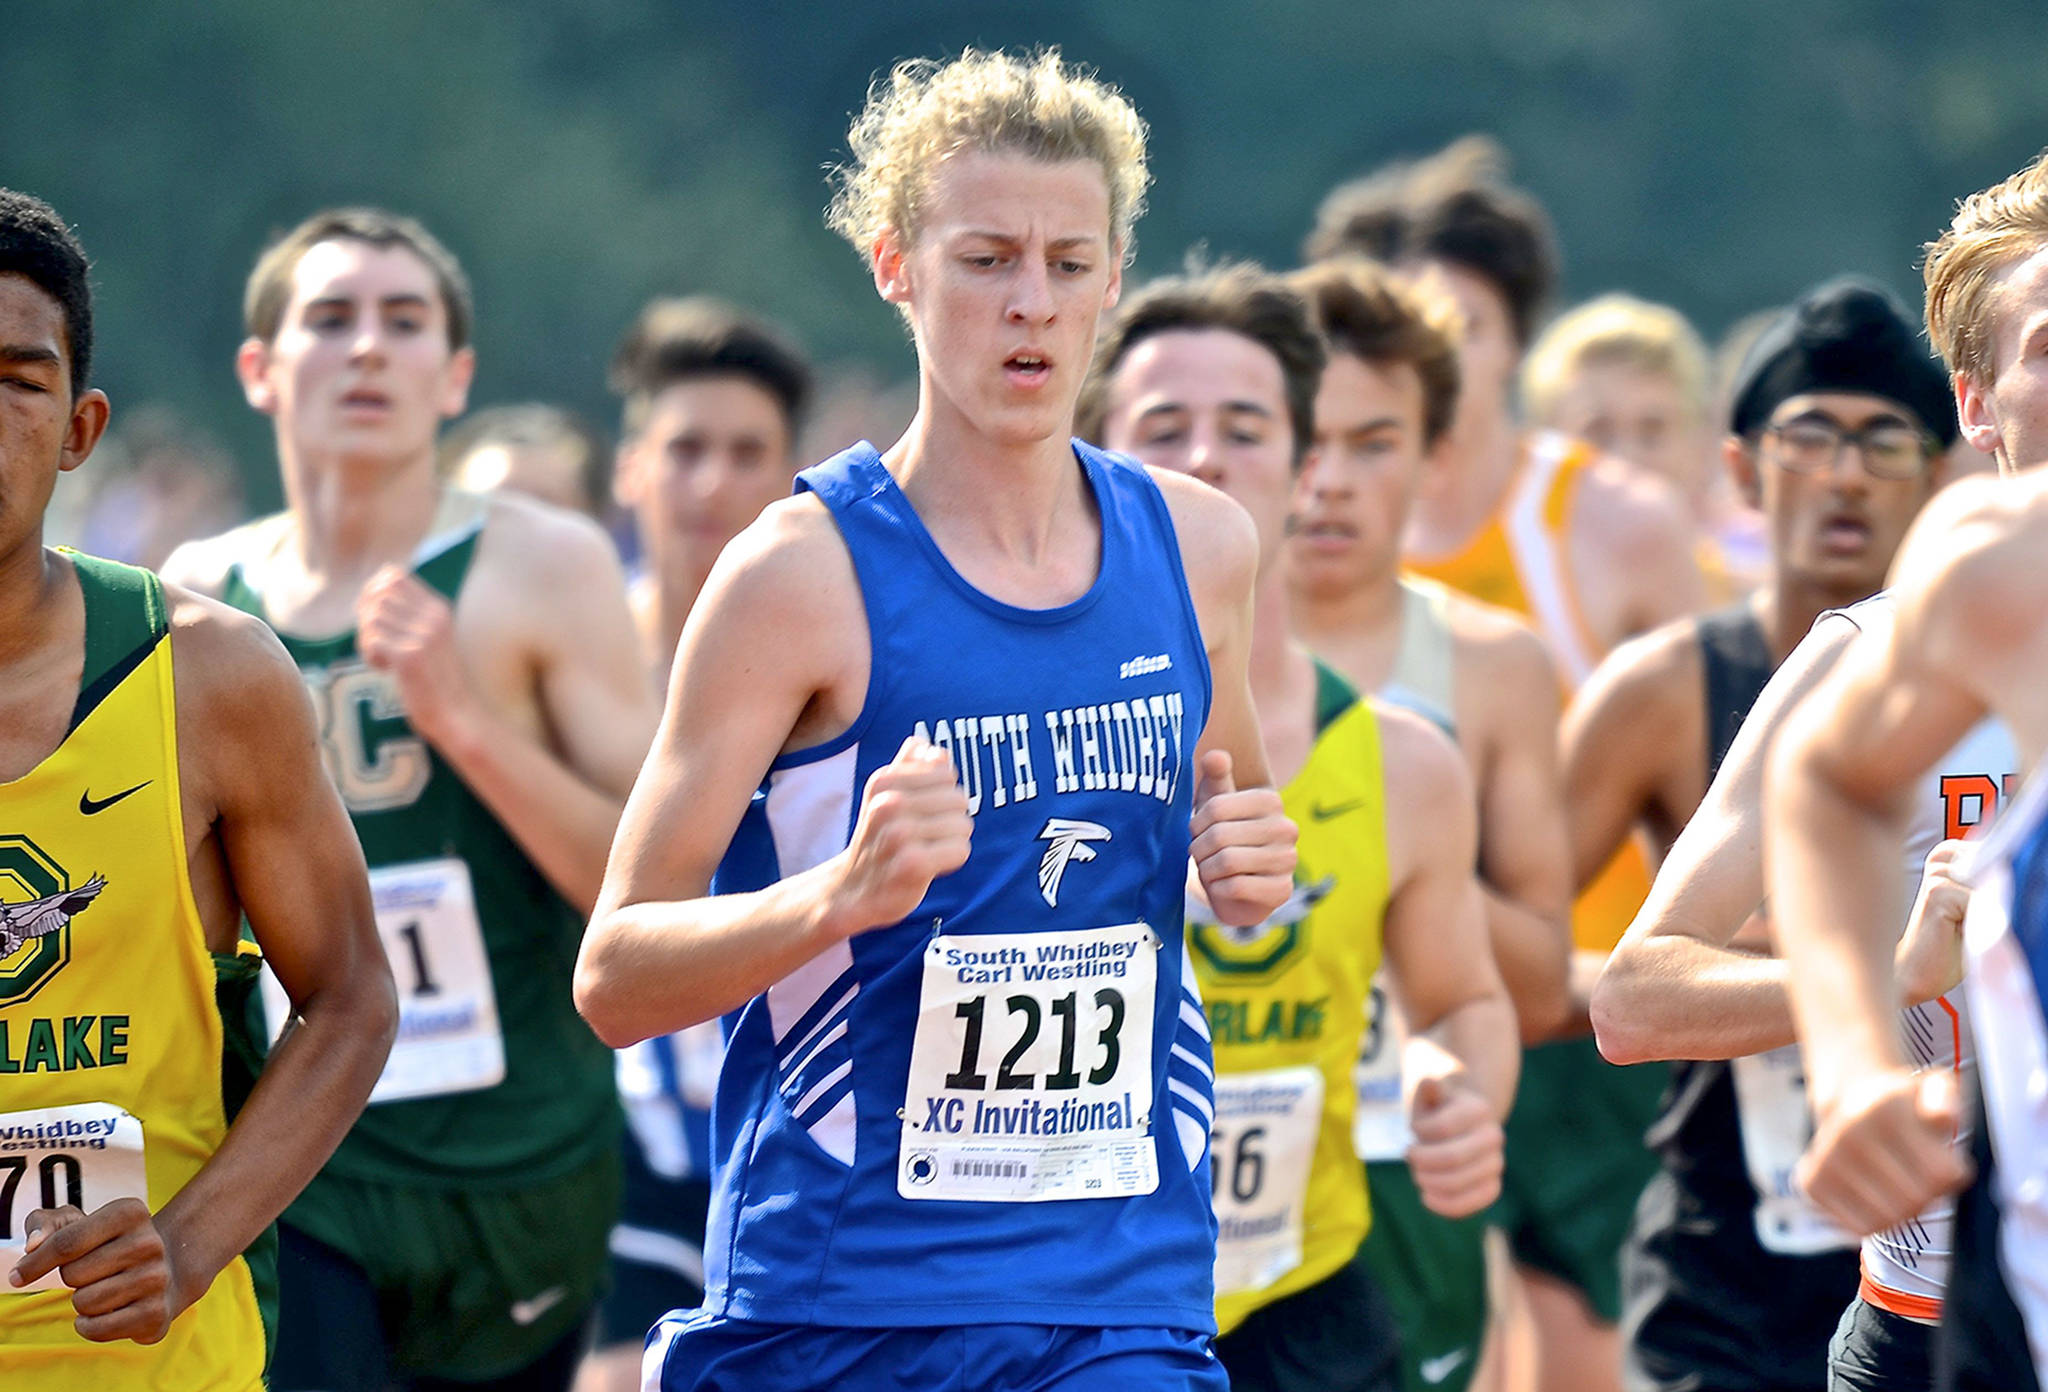 Several Falcons place in top 25 at home meet